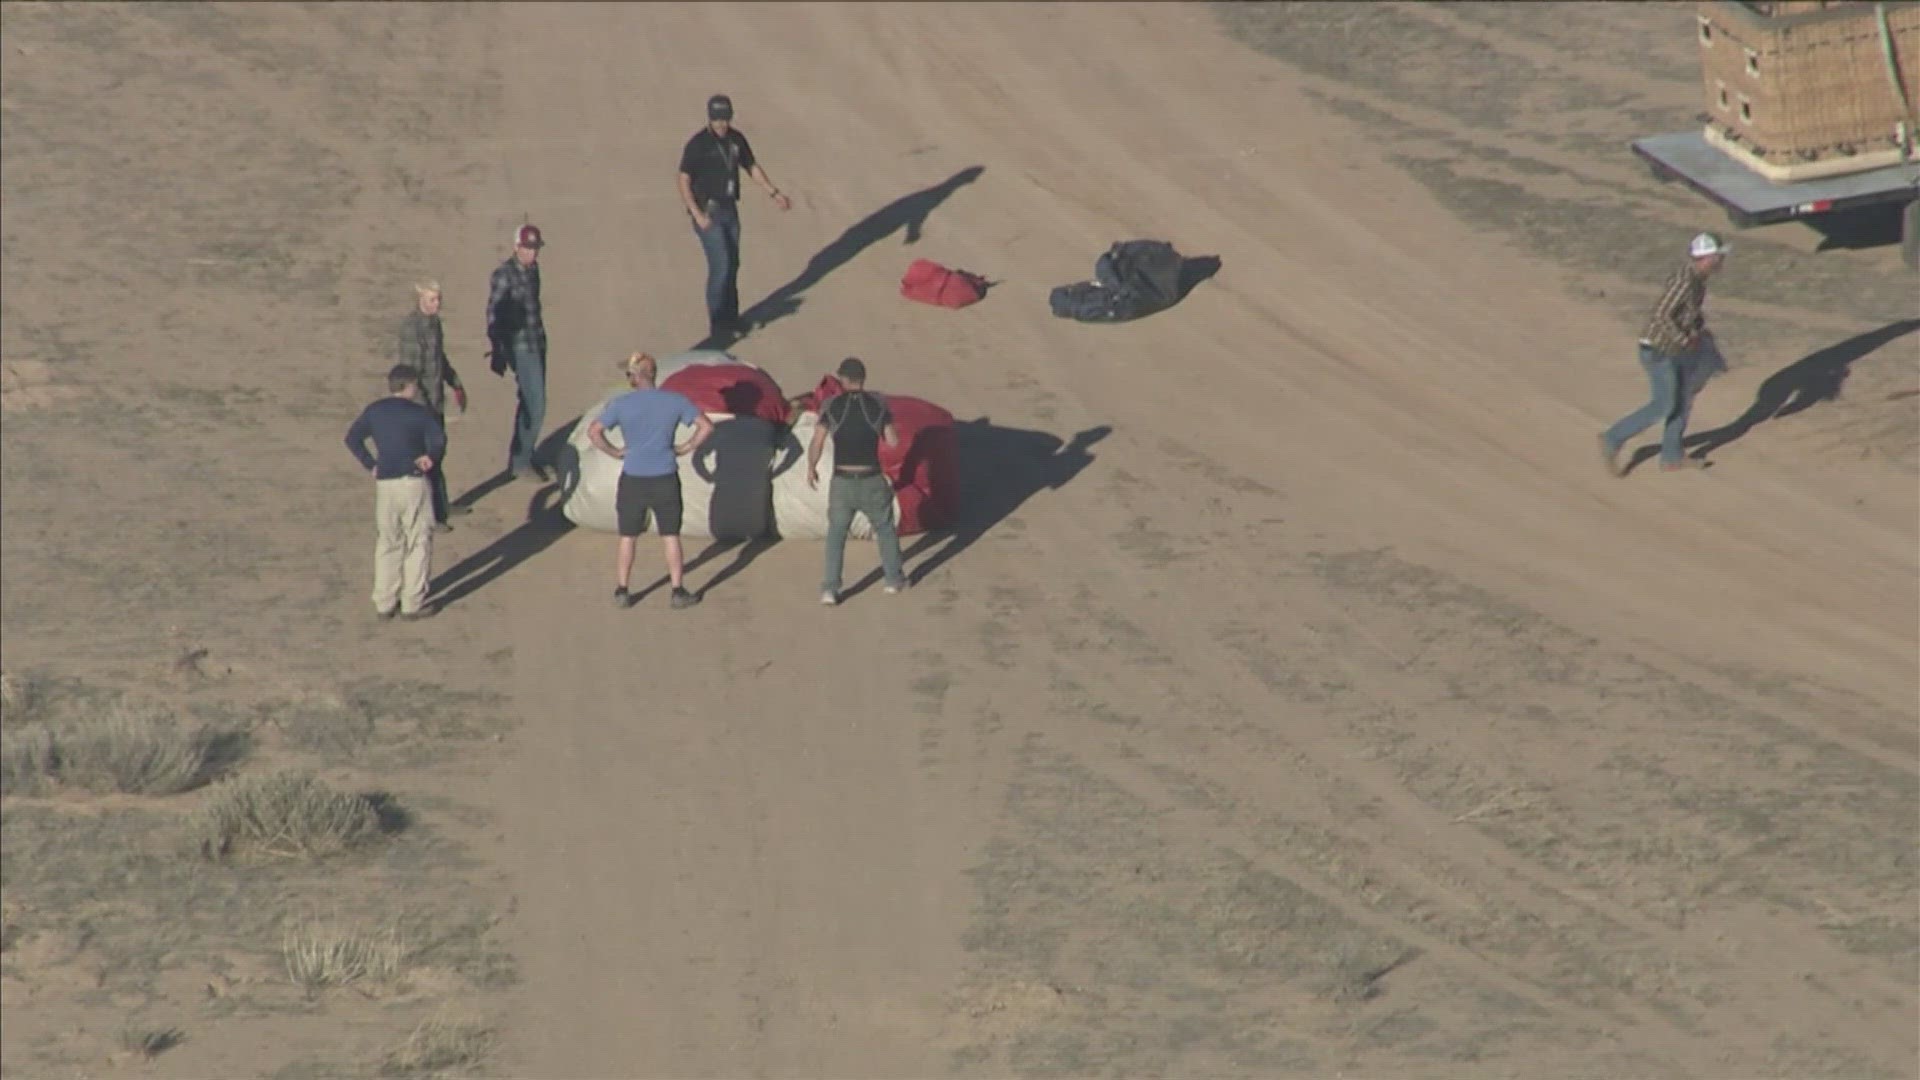 Four people were killed in a hot air balloon crash in Eloy on Sunday.